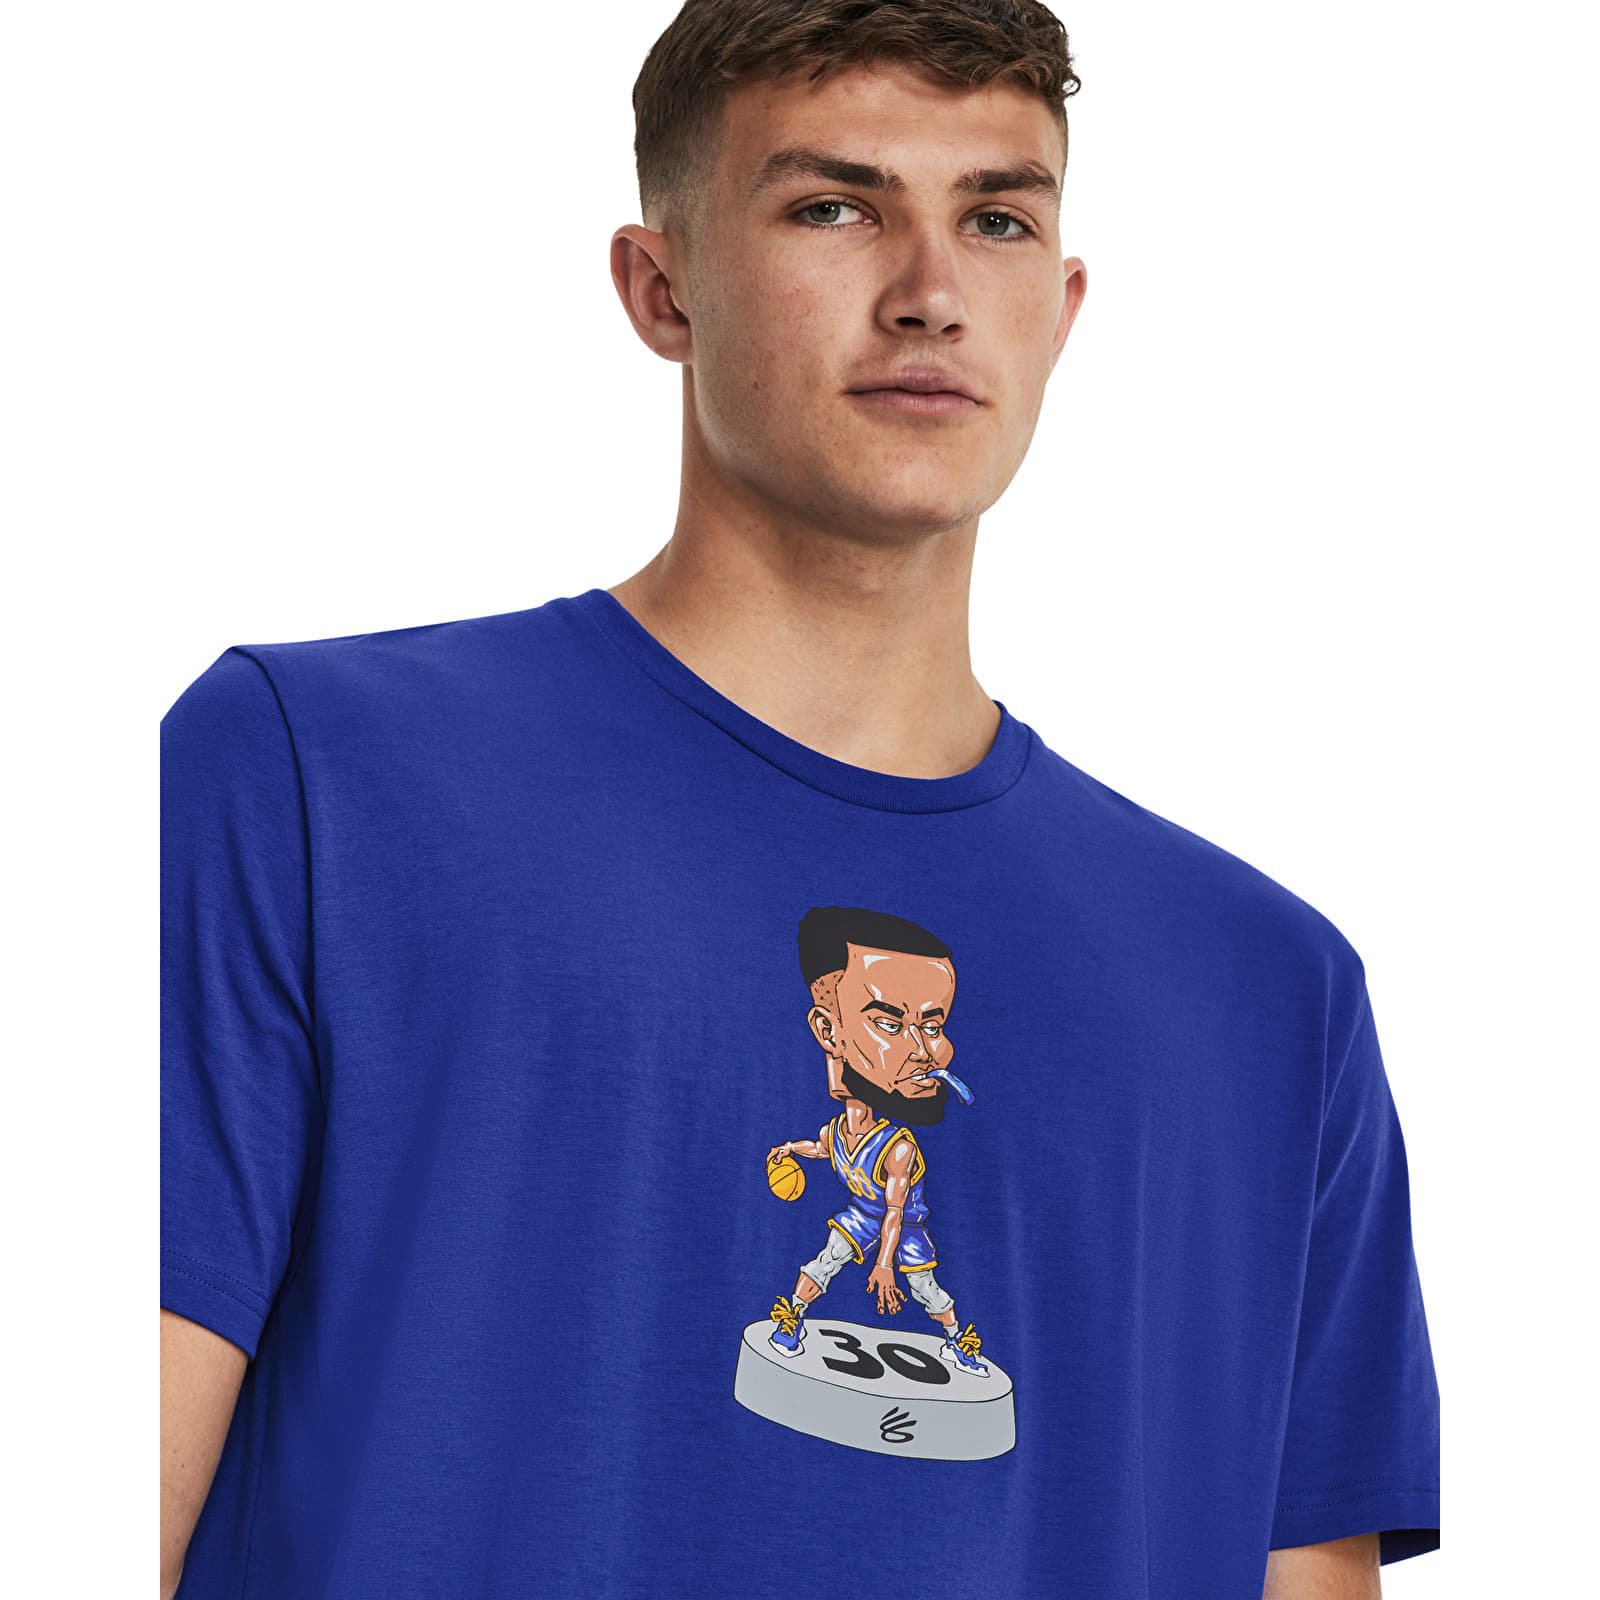 Curry Bobble Head Graphic T-Shirt